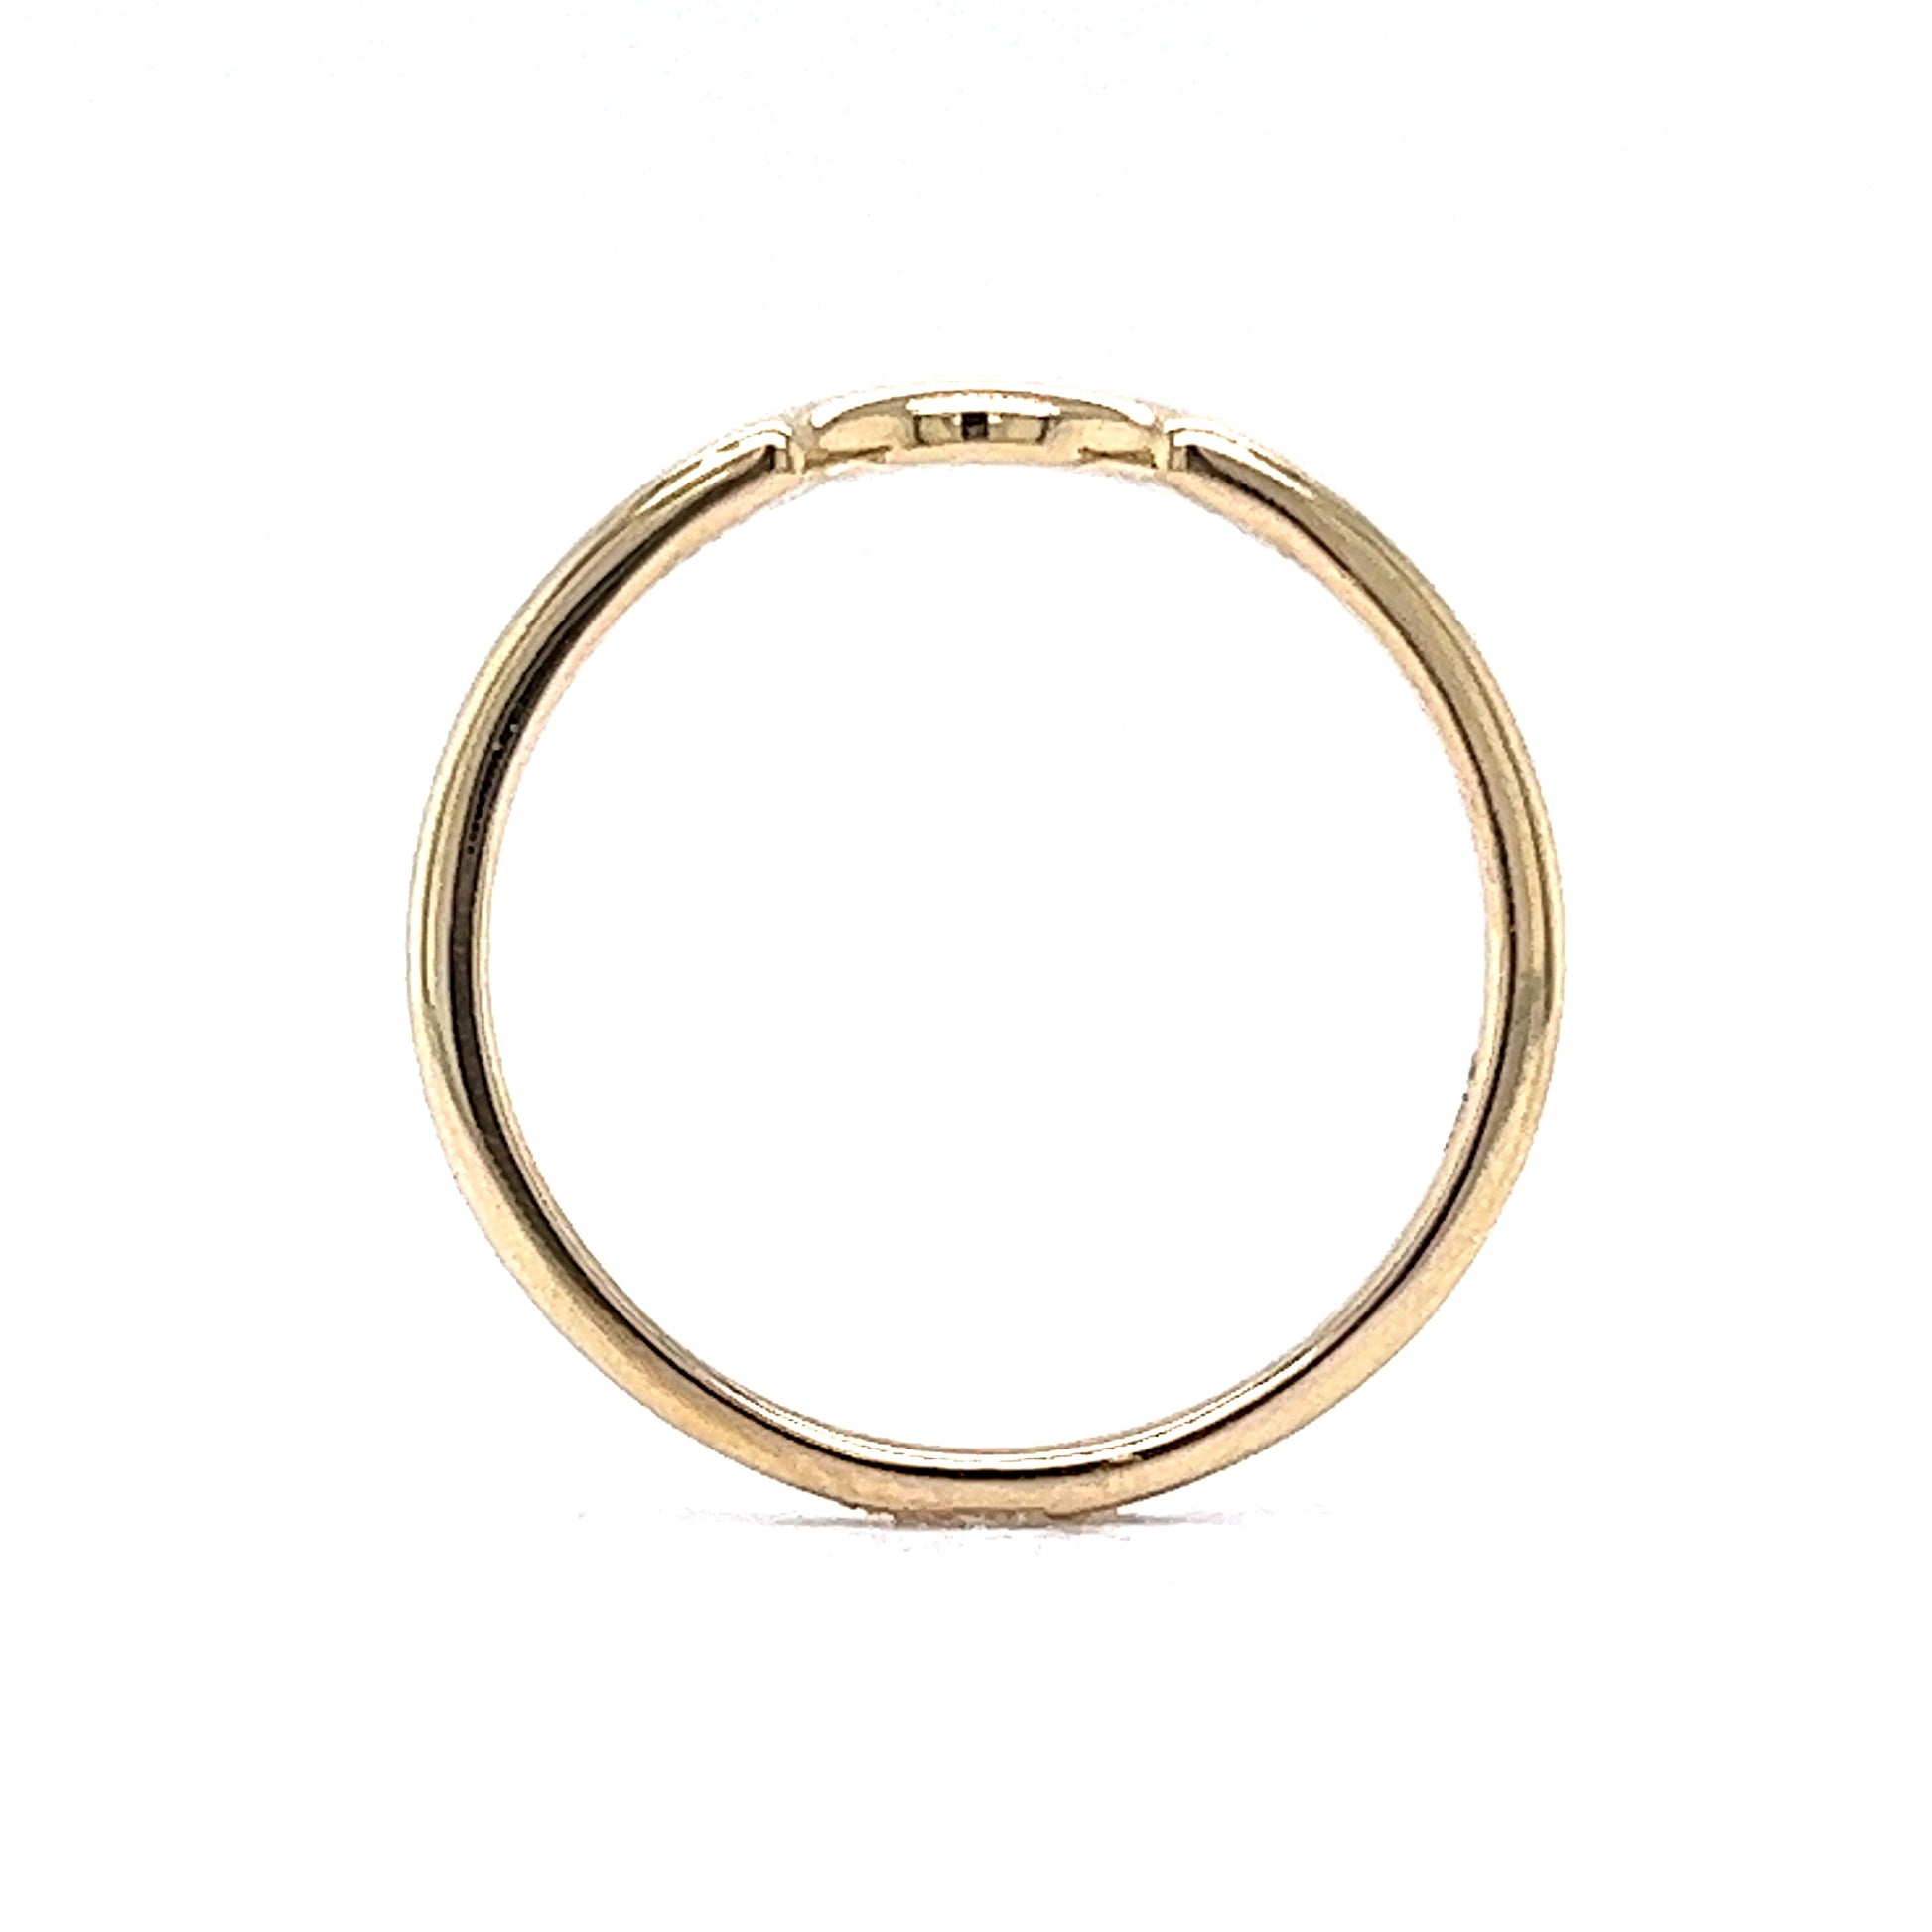 Half Moon Curved Wedding Band in 14k Yellow GoldComposition: 14 Karat Yellow Gold Ring Size: 7.0 Total Gram Weight: 1.4 g Inscription: 14k
      